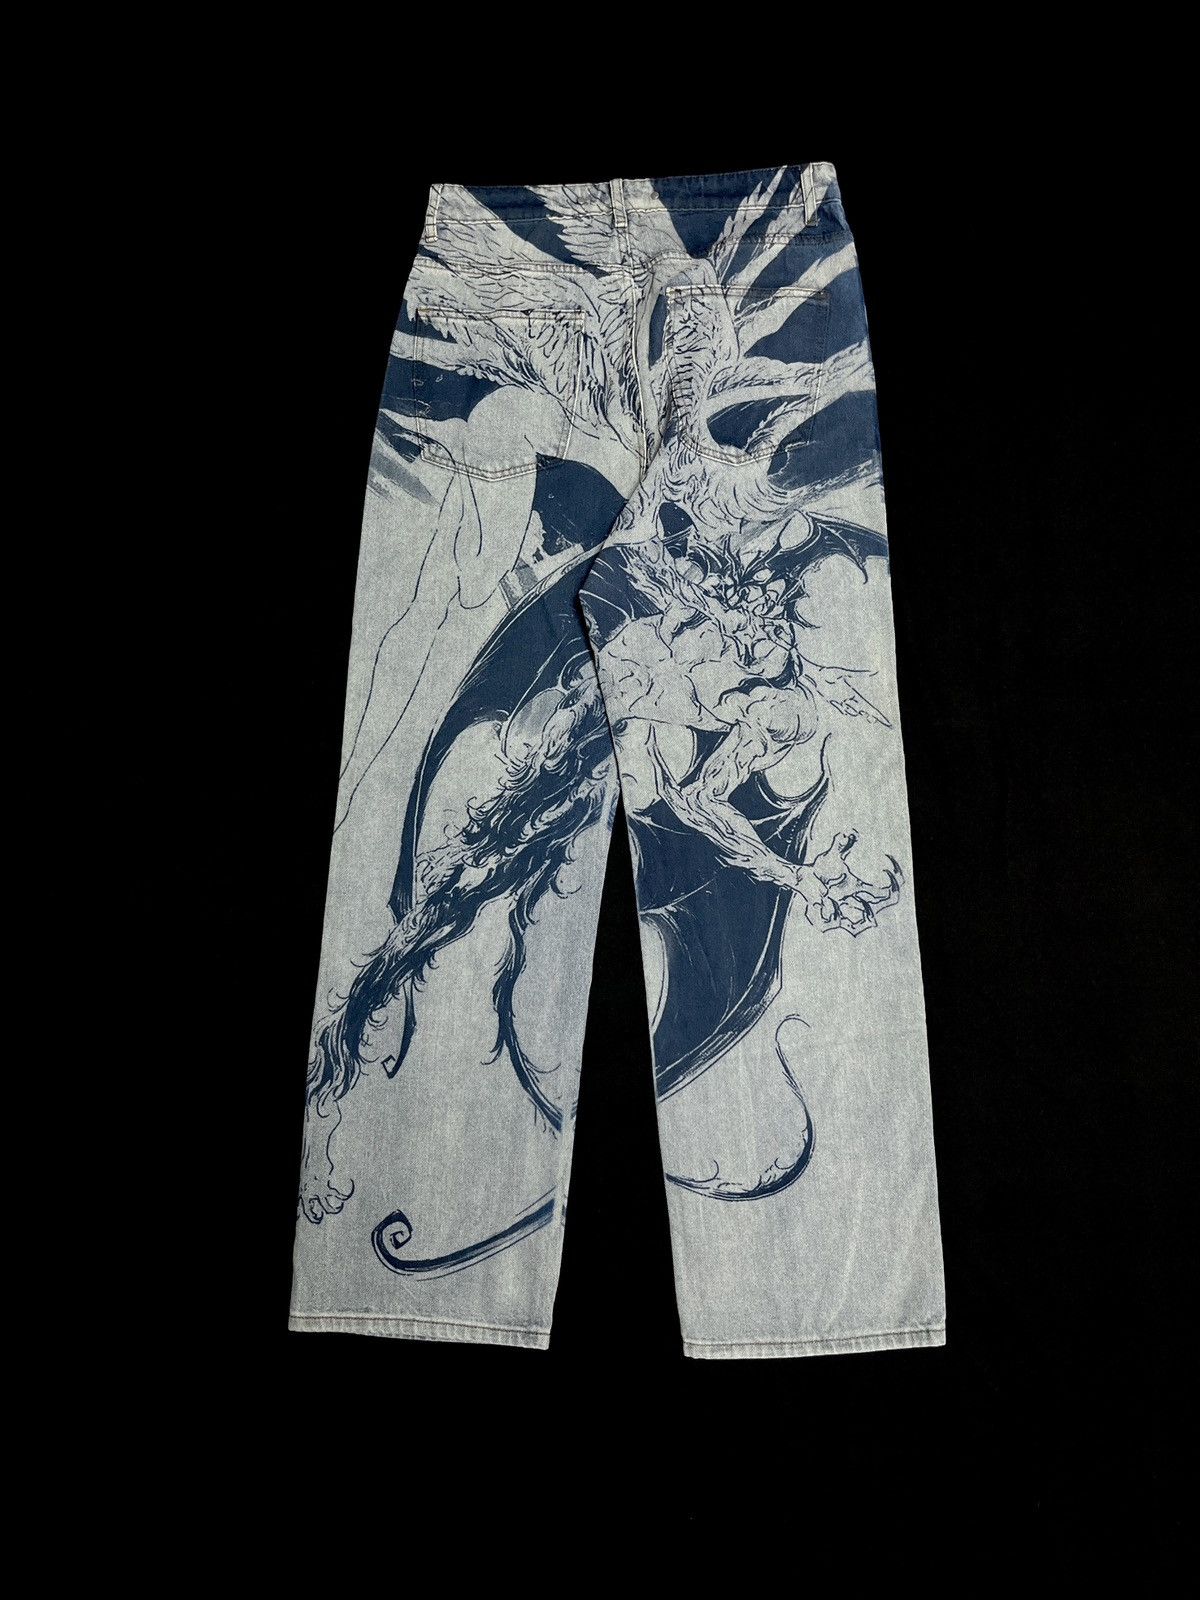 Rare - Devilman Crybaby Angel Type Organics Anime Relaxed Fit Jeans - 13